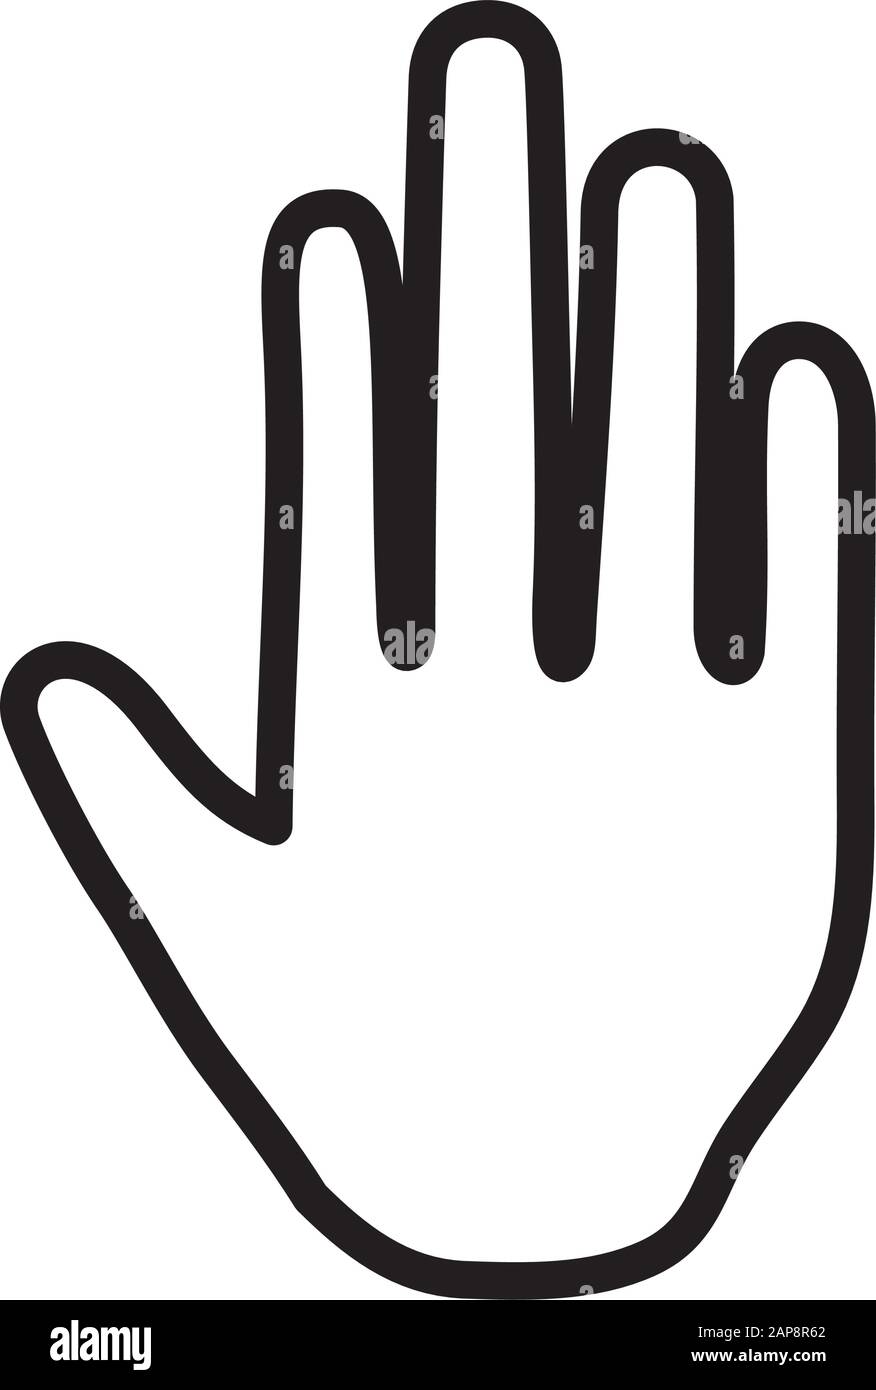 human hand showing five fingers stop gesture icon vector illustration Stock Vector